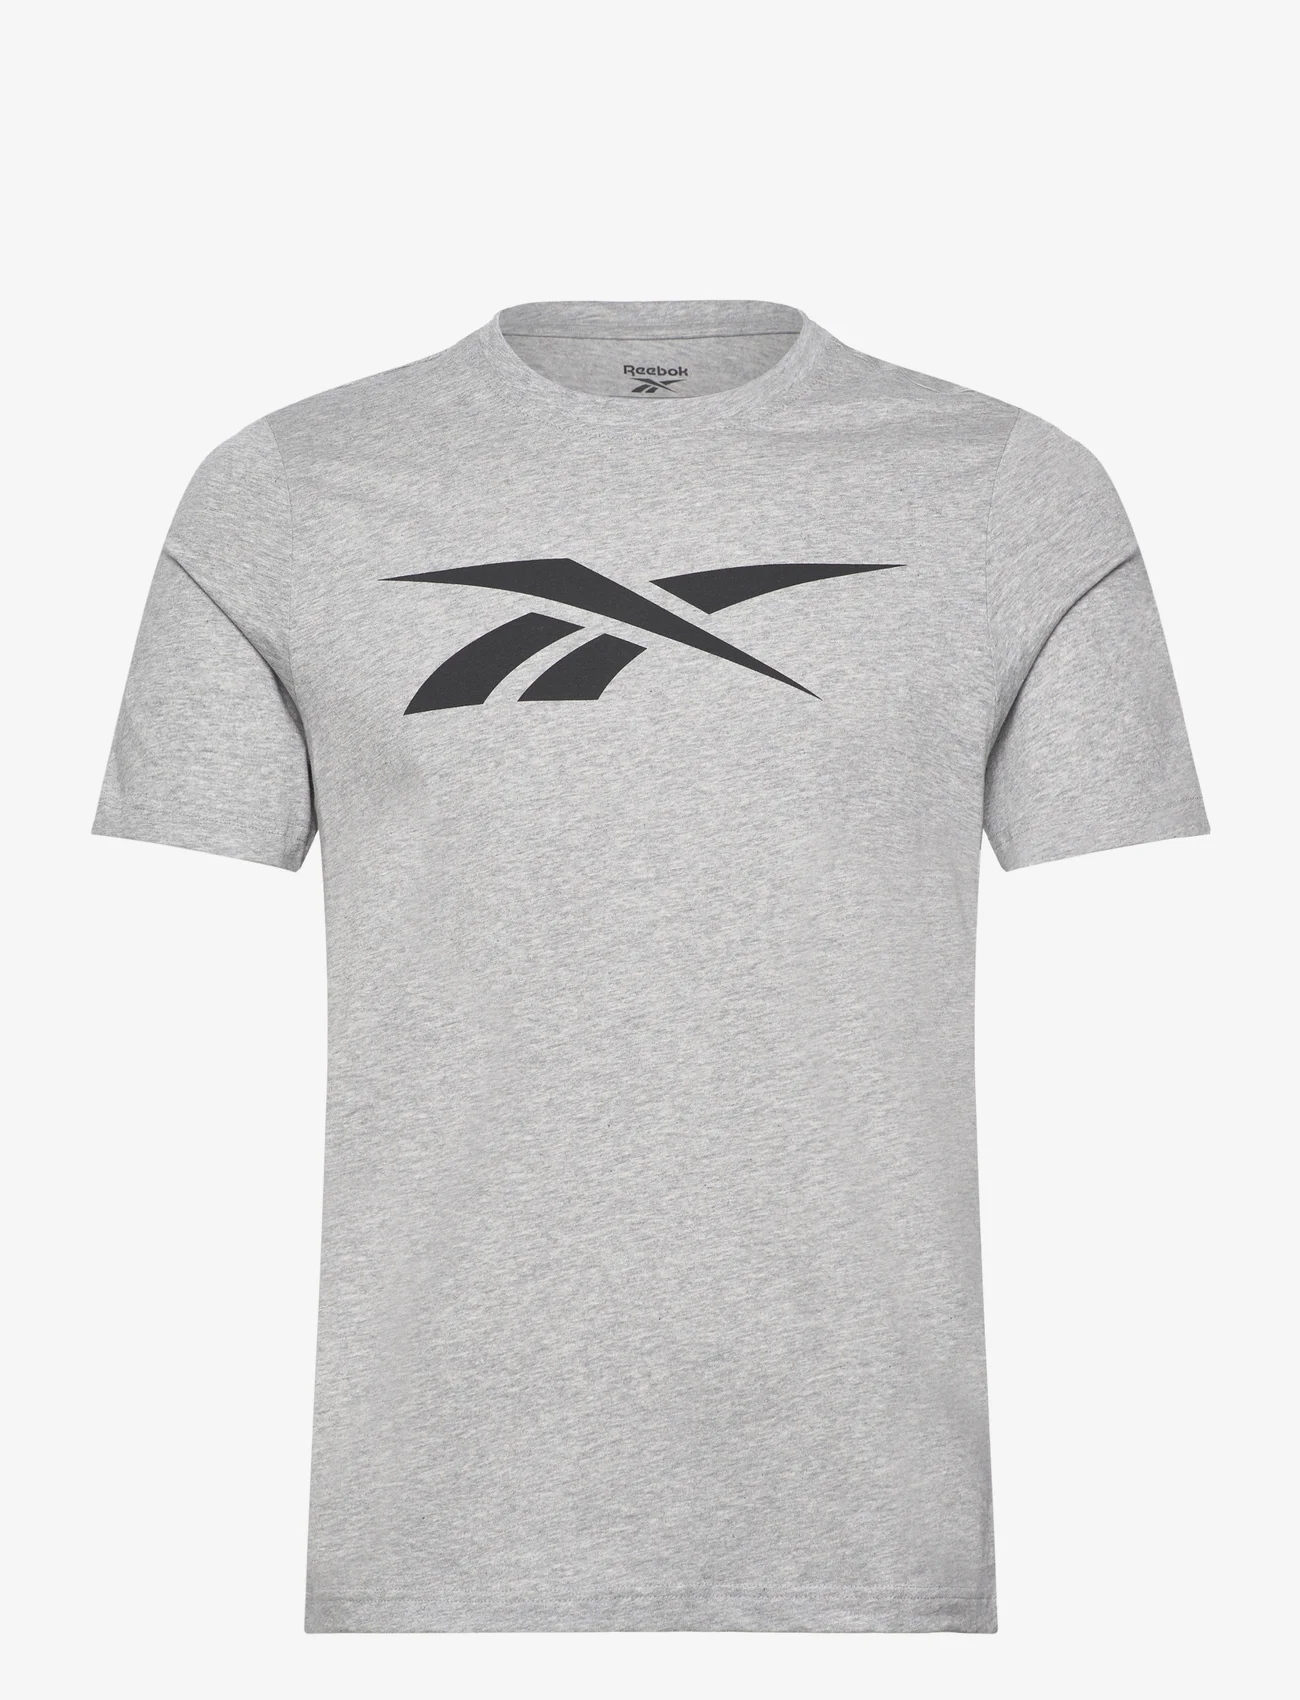 Reebok Performance - GS VECTOR TEE - lowest prices - mgreyh - 0